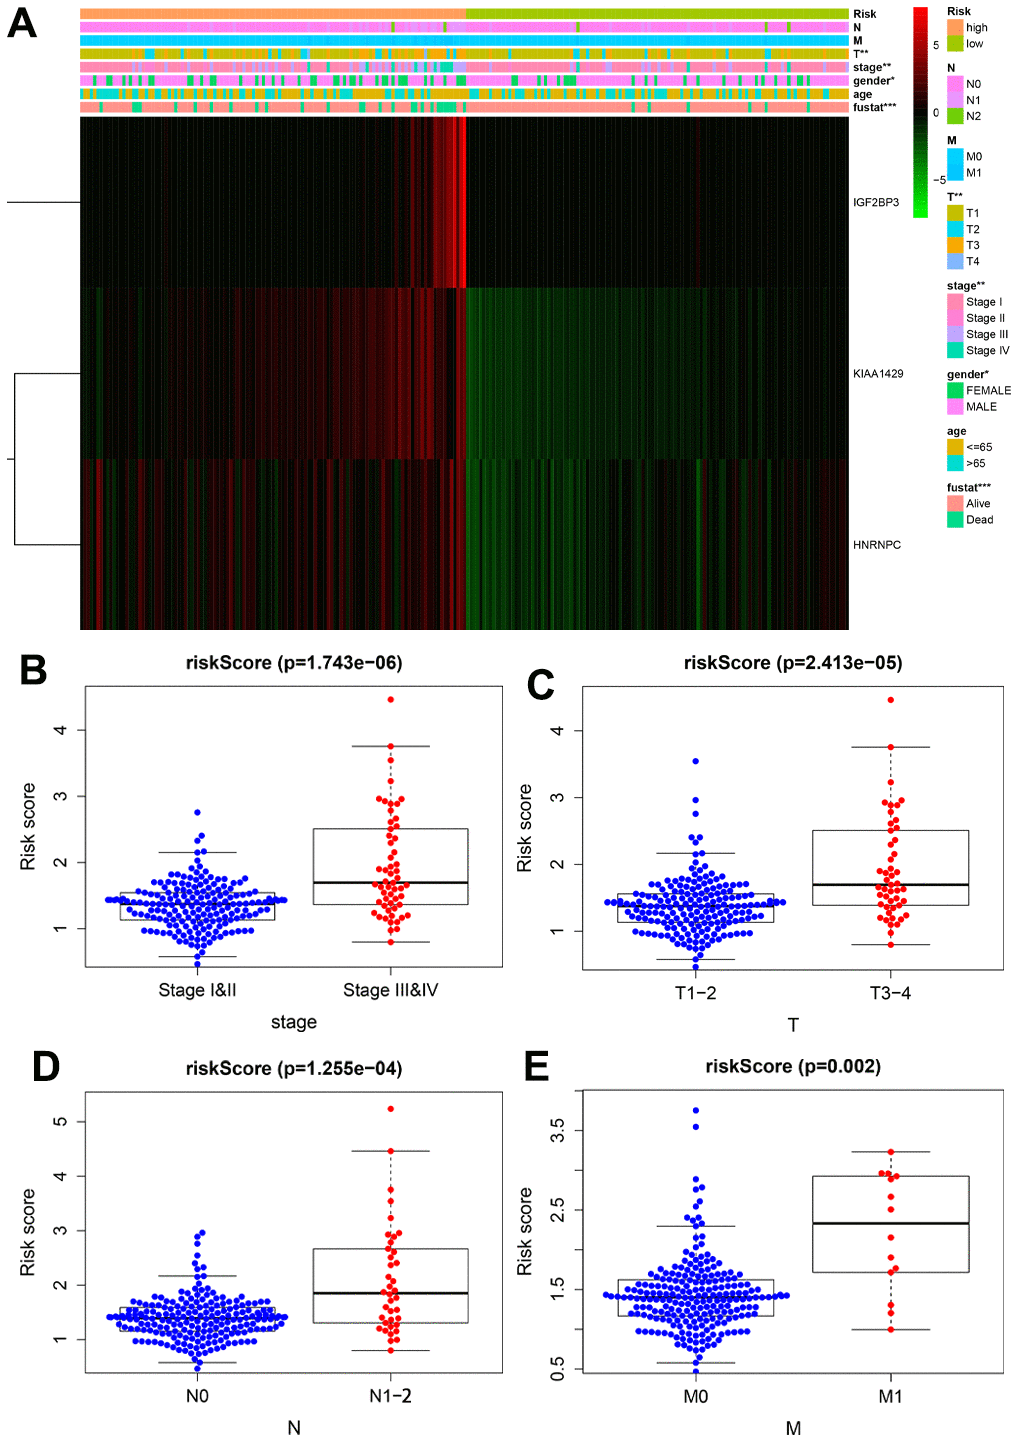 Correlation analysis between the expression of prognostic risk-related genes and clinicopathological features in high-risk and low-risk KIRP patients. (A) The heatmap shows the expression of the three prognostic signature-related genes in the low- and high-risk group KIRP patients stratified according to the clinicopathological parameters, namely, survival status (alive or dead), age (>65 y or Chi-square test evaluated the correlation between the clinicopathological parameters and prognostic risk. *P P P B–E) The distribution of risk scores in high- and low-risk patients stratified according to (B) AJCC stage (stages I-II vs. stages III-IV), (D) T stage (T1-2 vs. T3-4), (D) N stage (N0 vs. N1-2) and (E) M stage (M0 vs. M1).